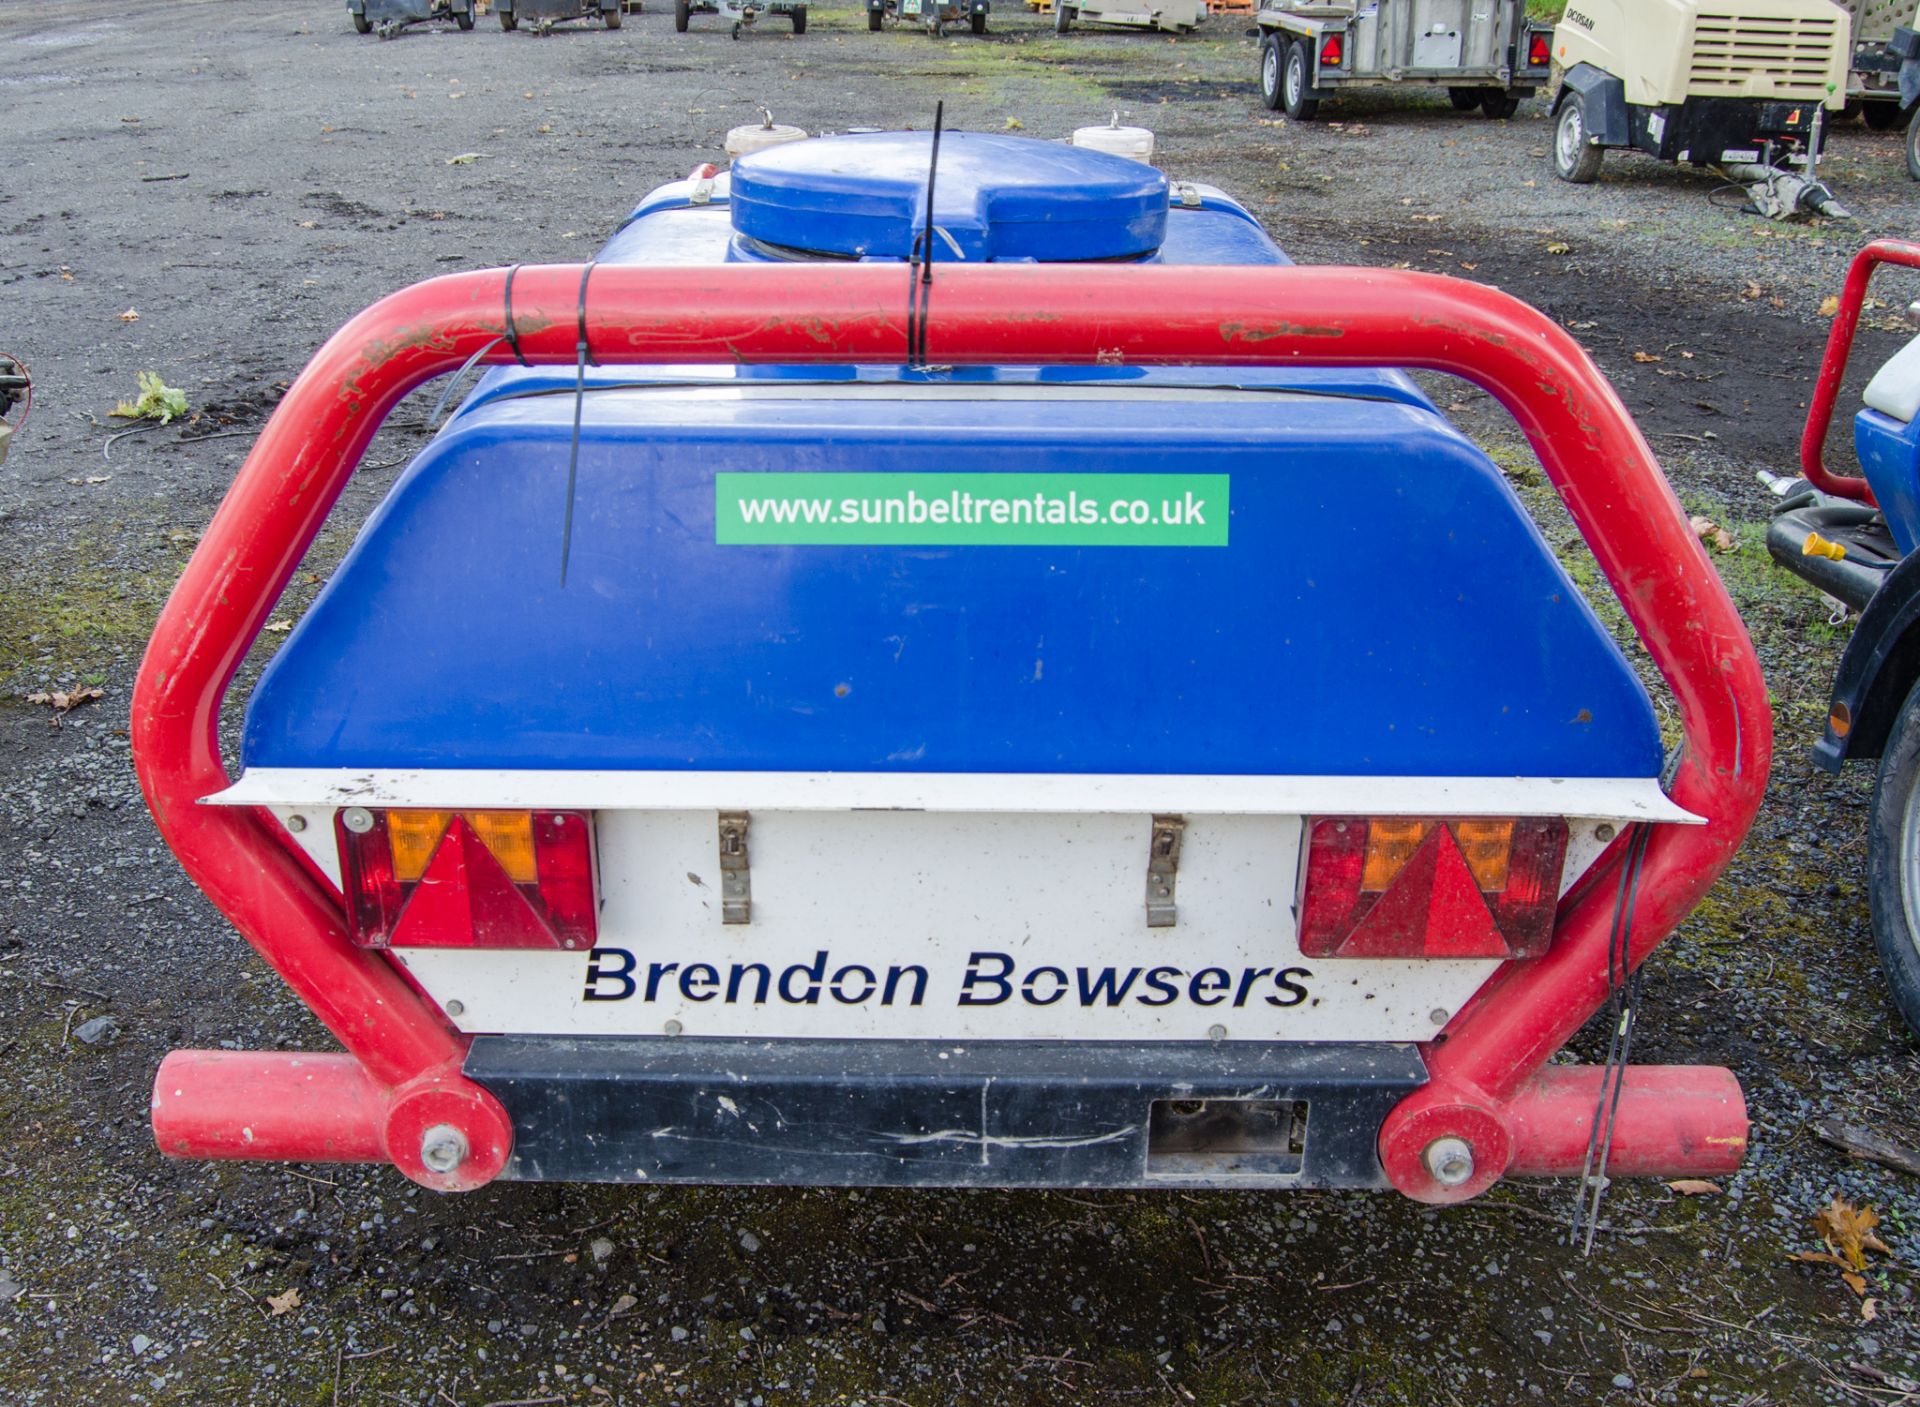 Brendon Bowsers diesel driven fast tow pressure washer bowser A784442 - Image 4 of 5